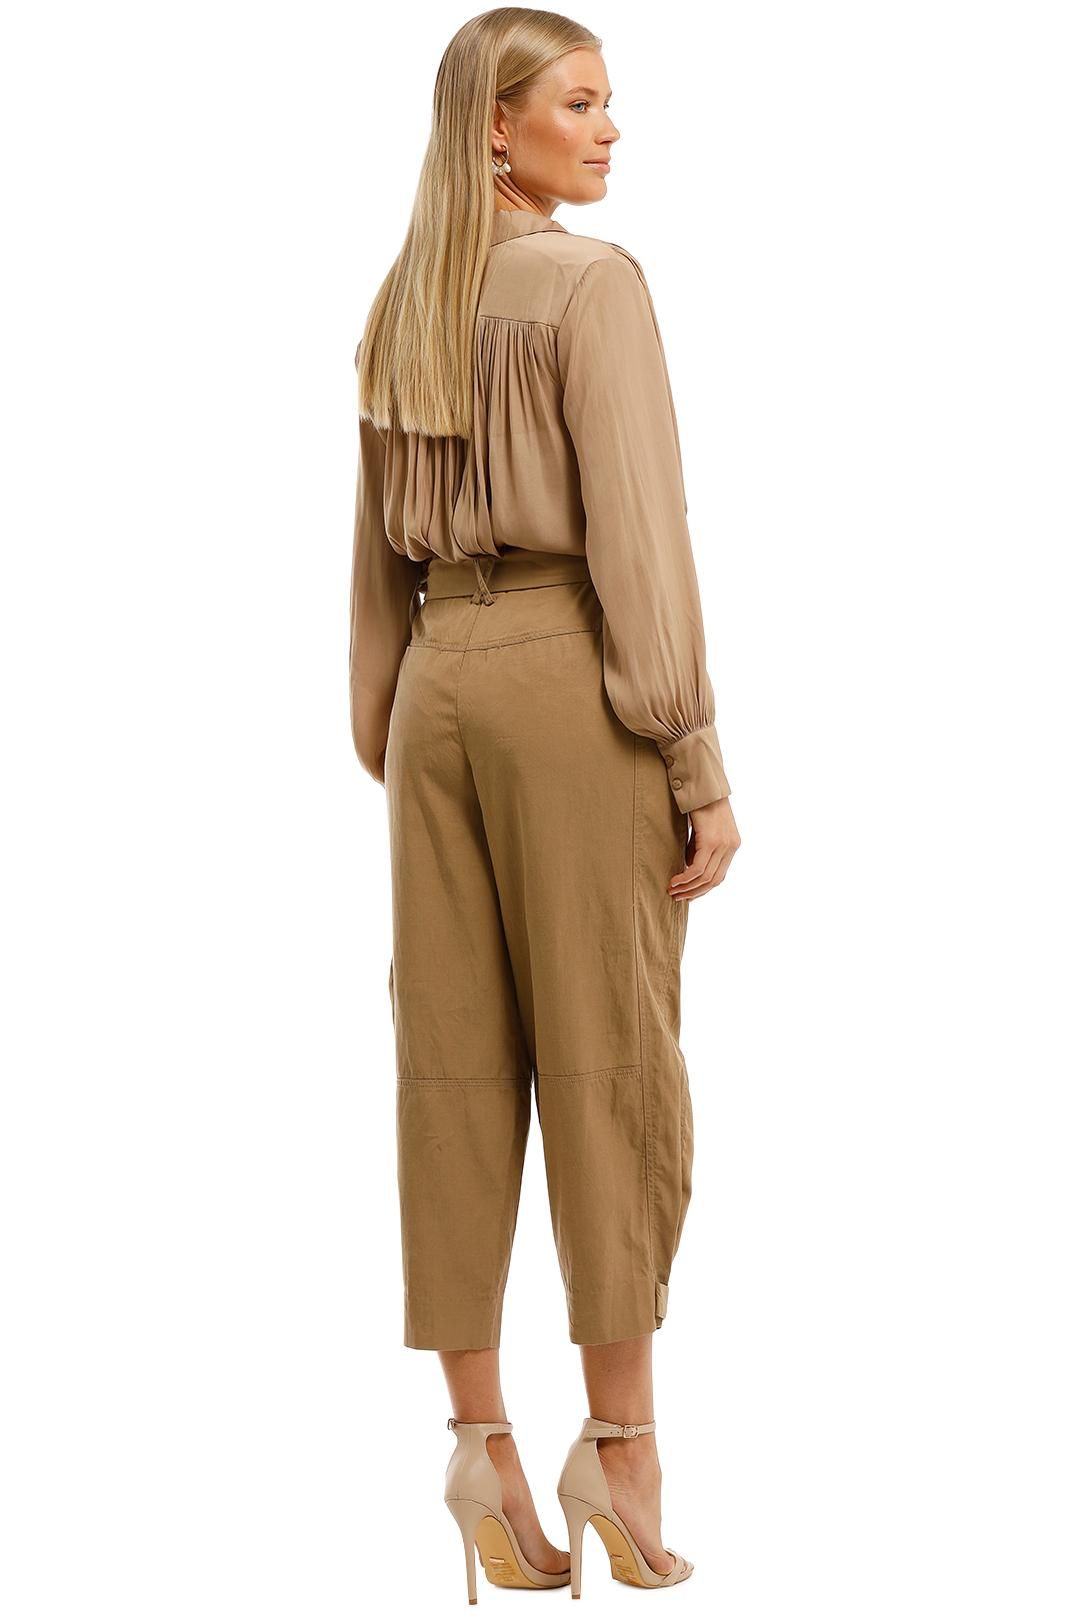 Witchery Buckle Utility Pant Caramel Brown with Pockets